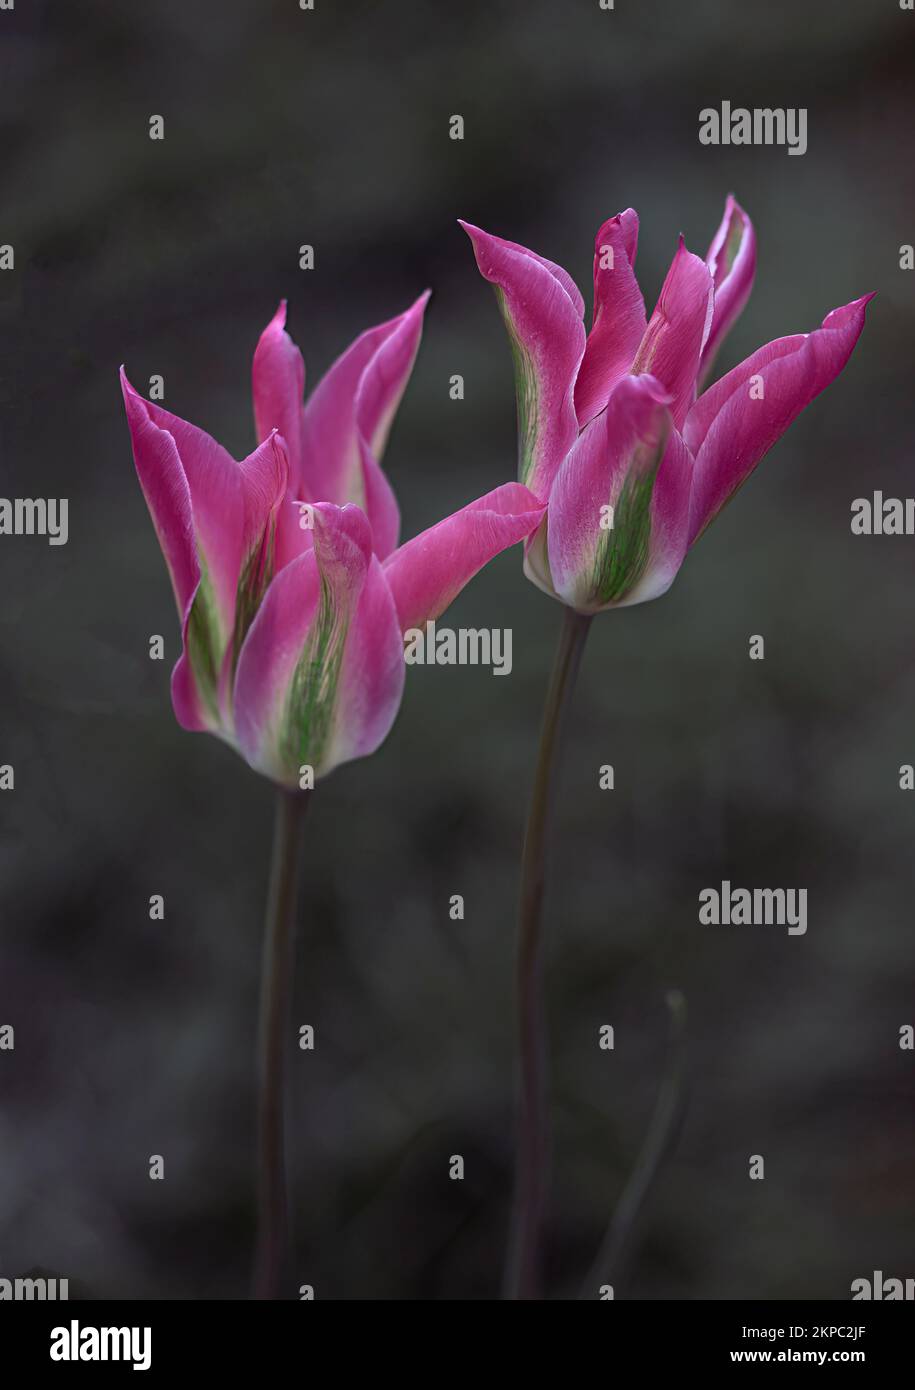 A vertical shot of pink garden tulips with a blurred background Stock Photo